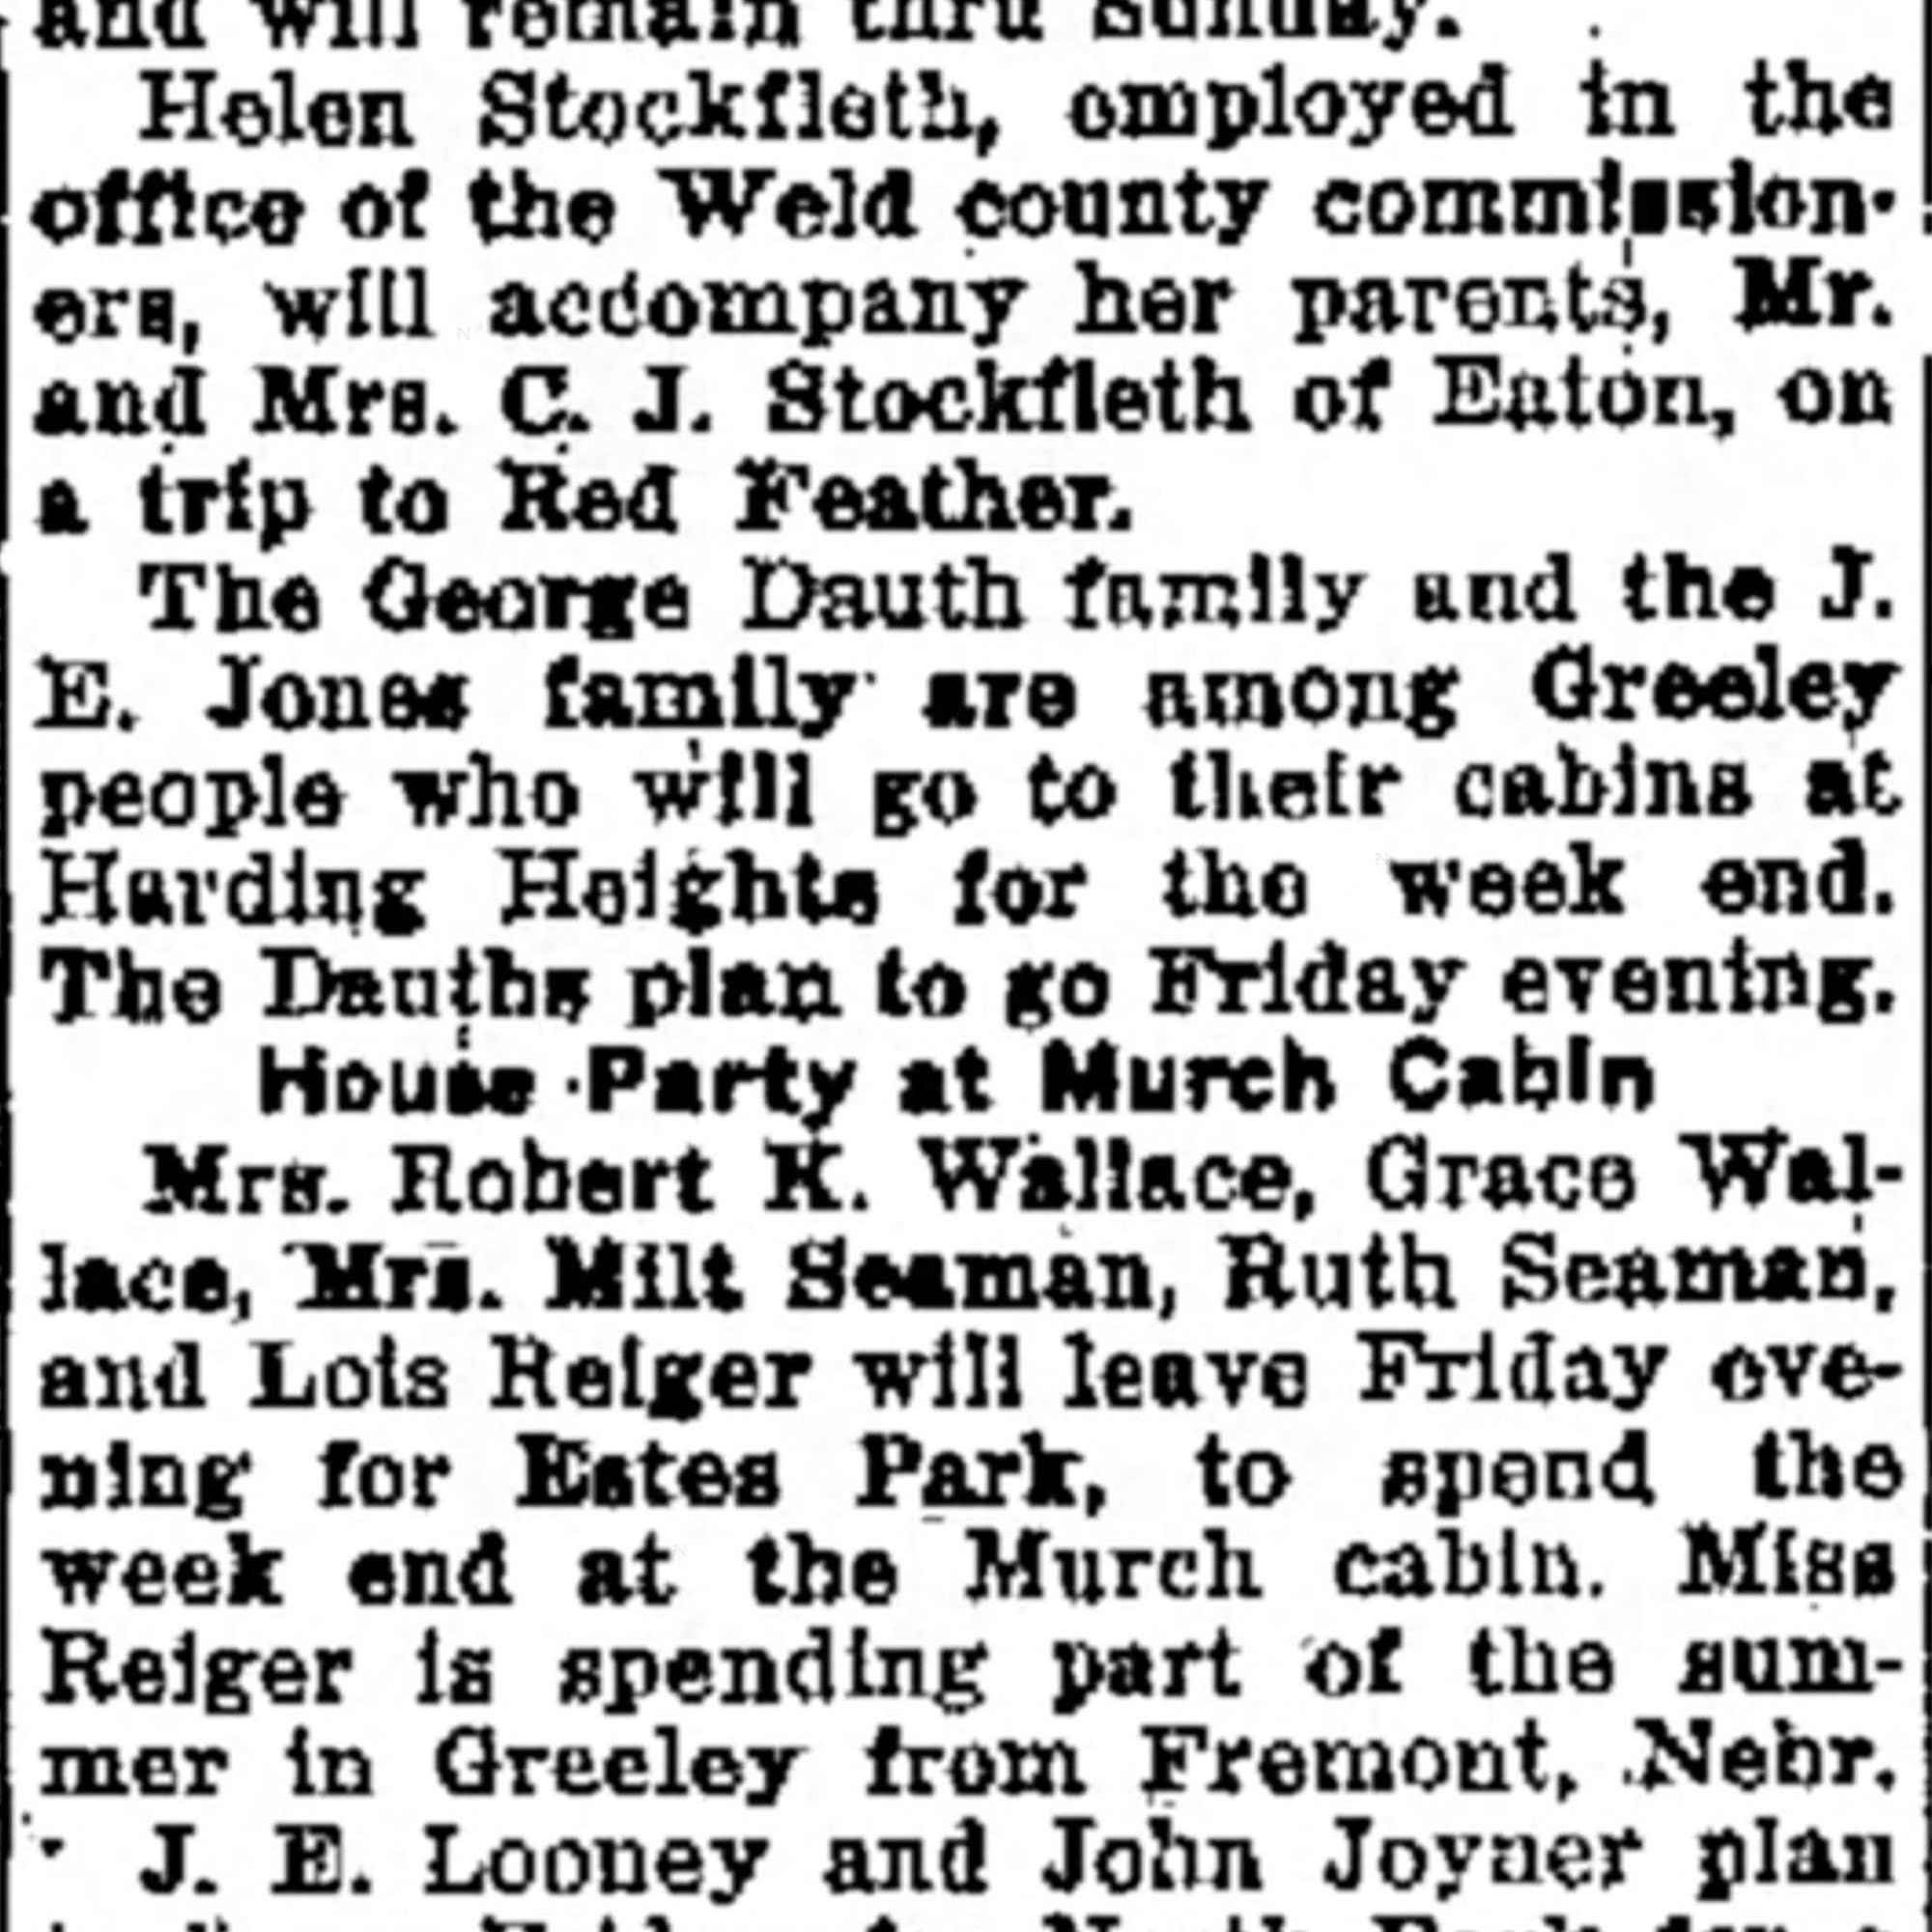 Dauth Family Archive - 1931-07-03 - Greeley Daily Tribune - George Dauth family at Harding Heights